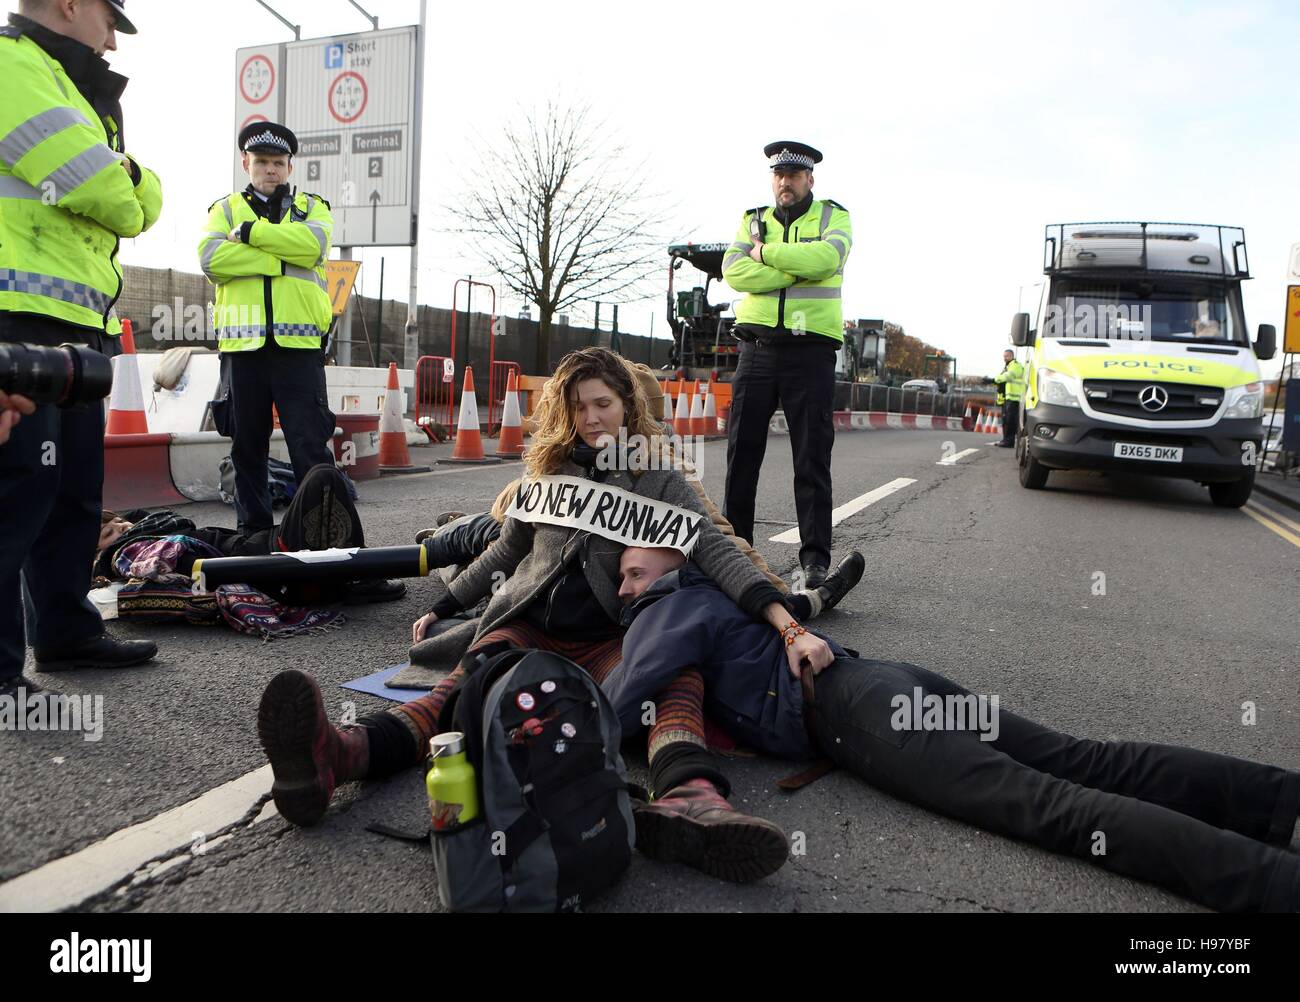 Protestors from campaign group RisingUp! lock themselves together as they block the east ramp at Heathrow Airport, in protest over the development of a third runway. Stock Photo